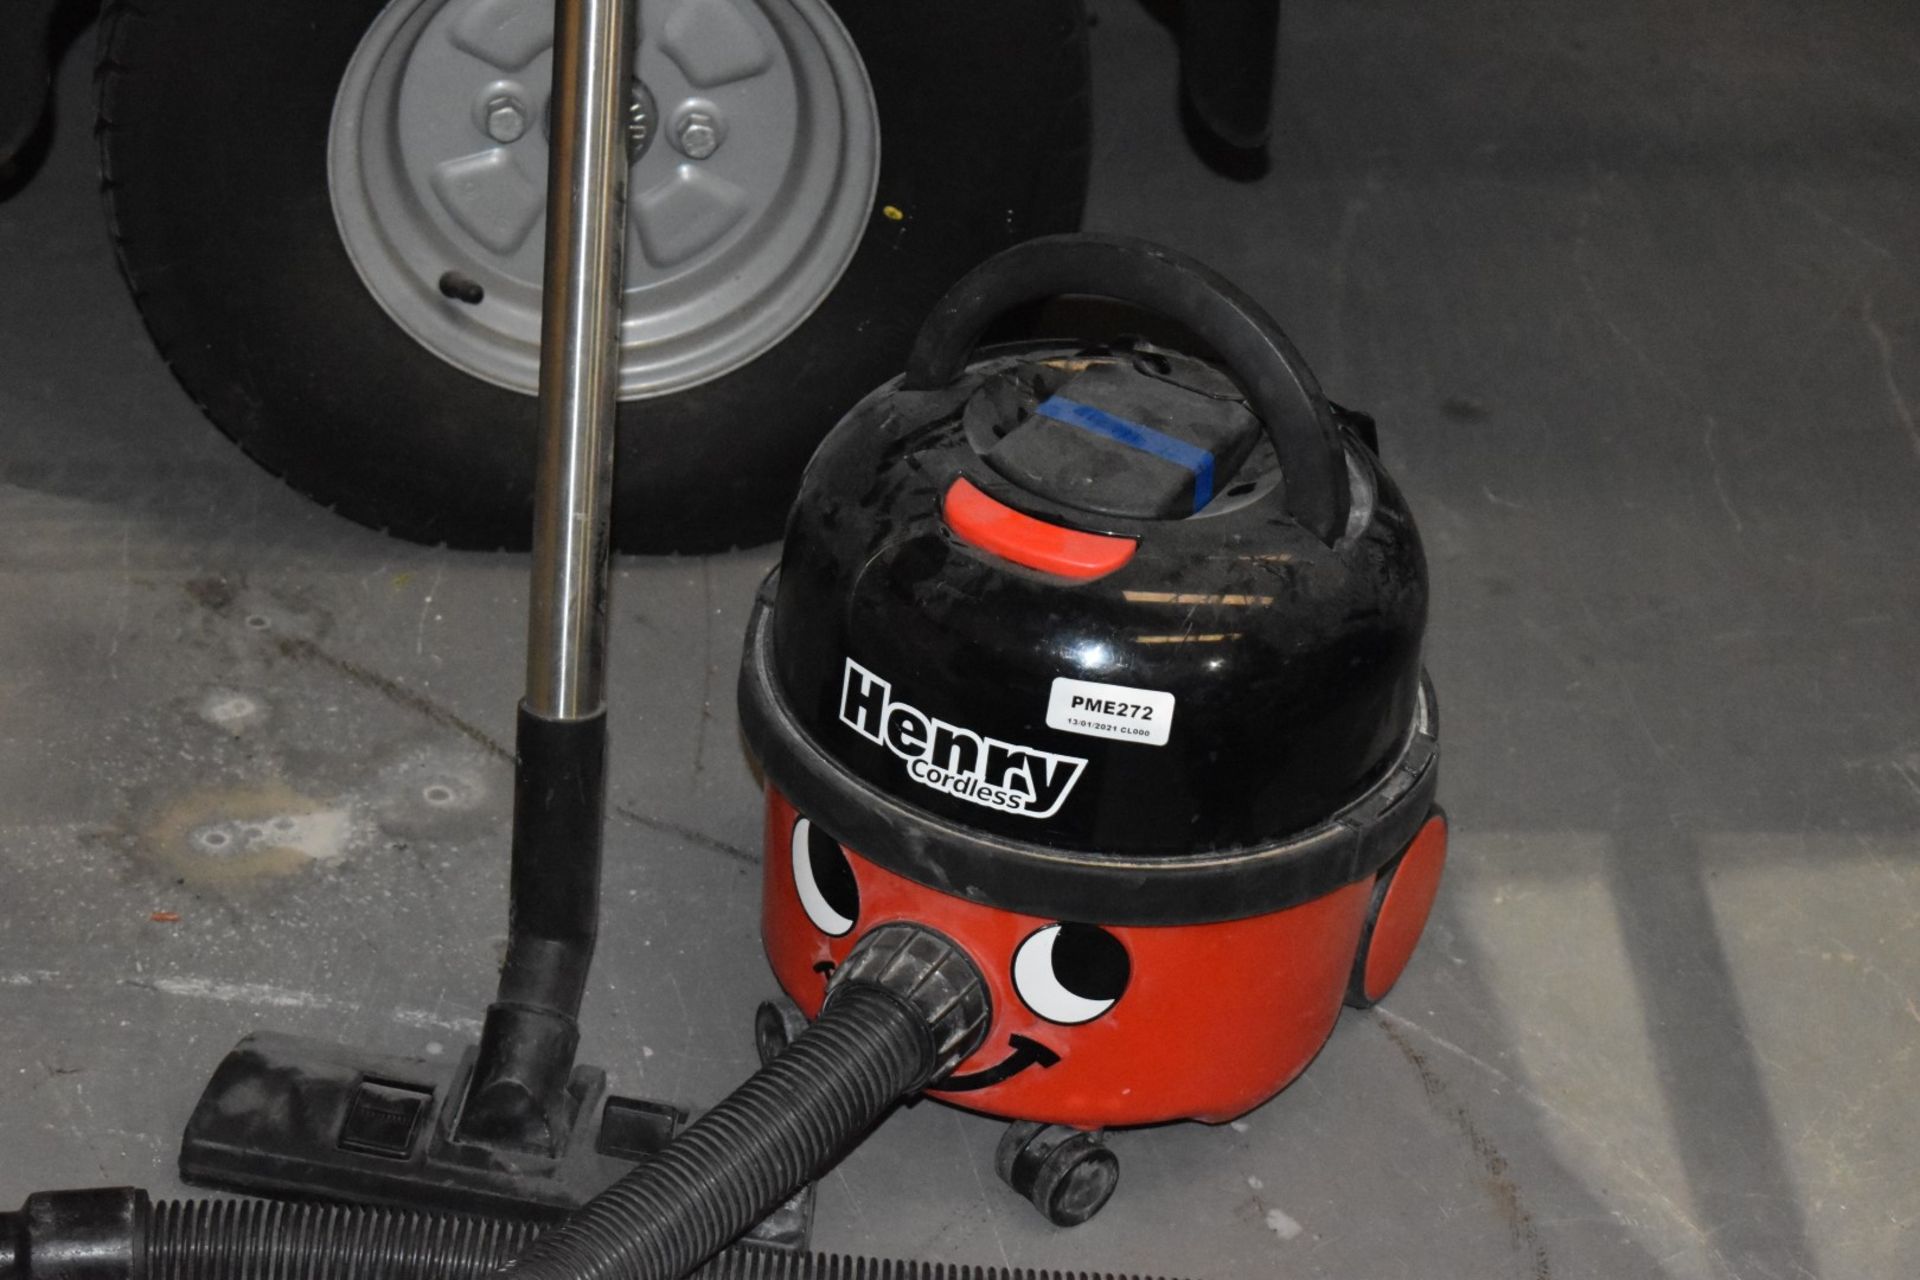 1 x Numatic Henry Hoover Cordless With Two Batteries and Charger PME272 - Image 3 of 6